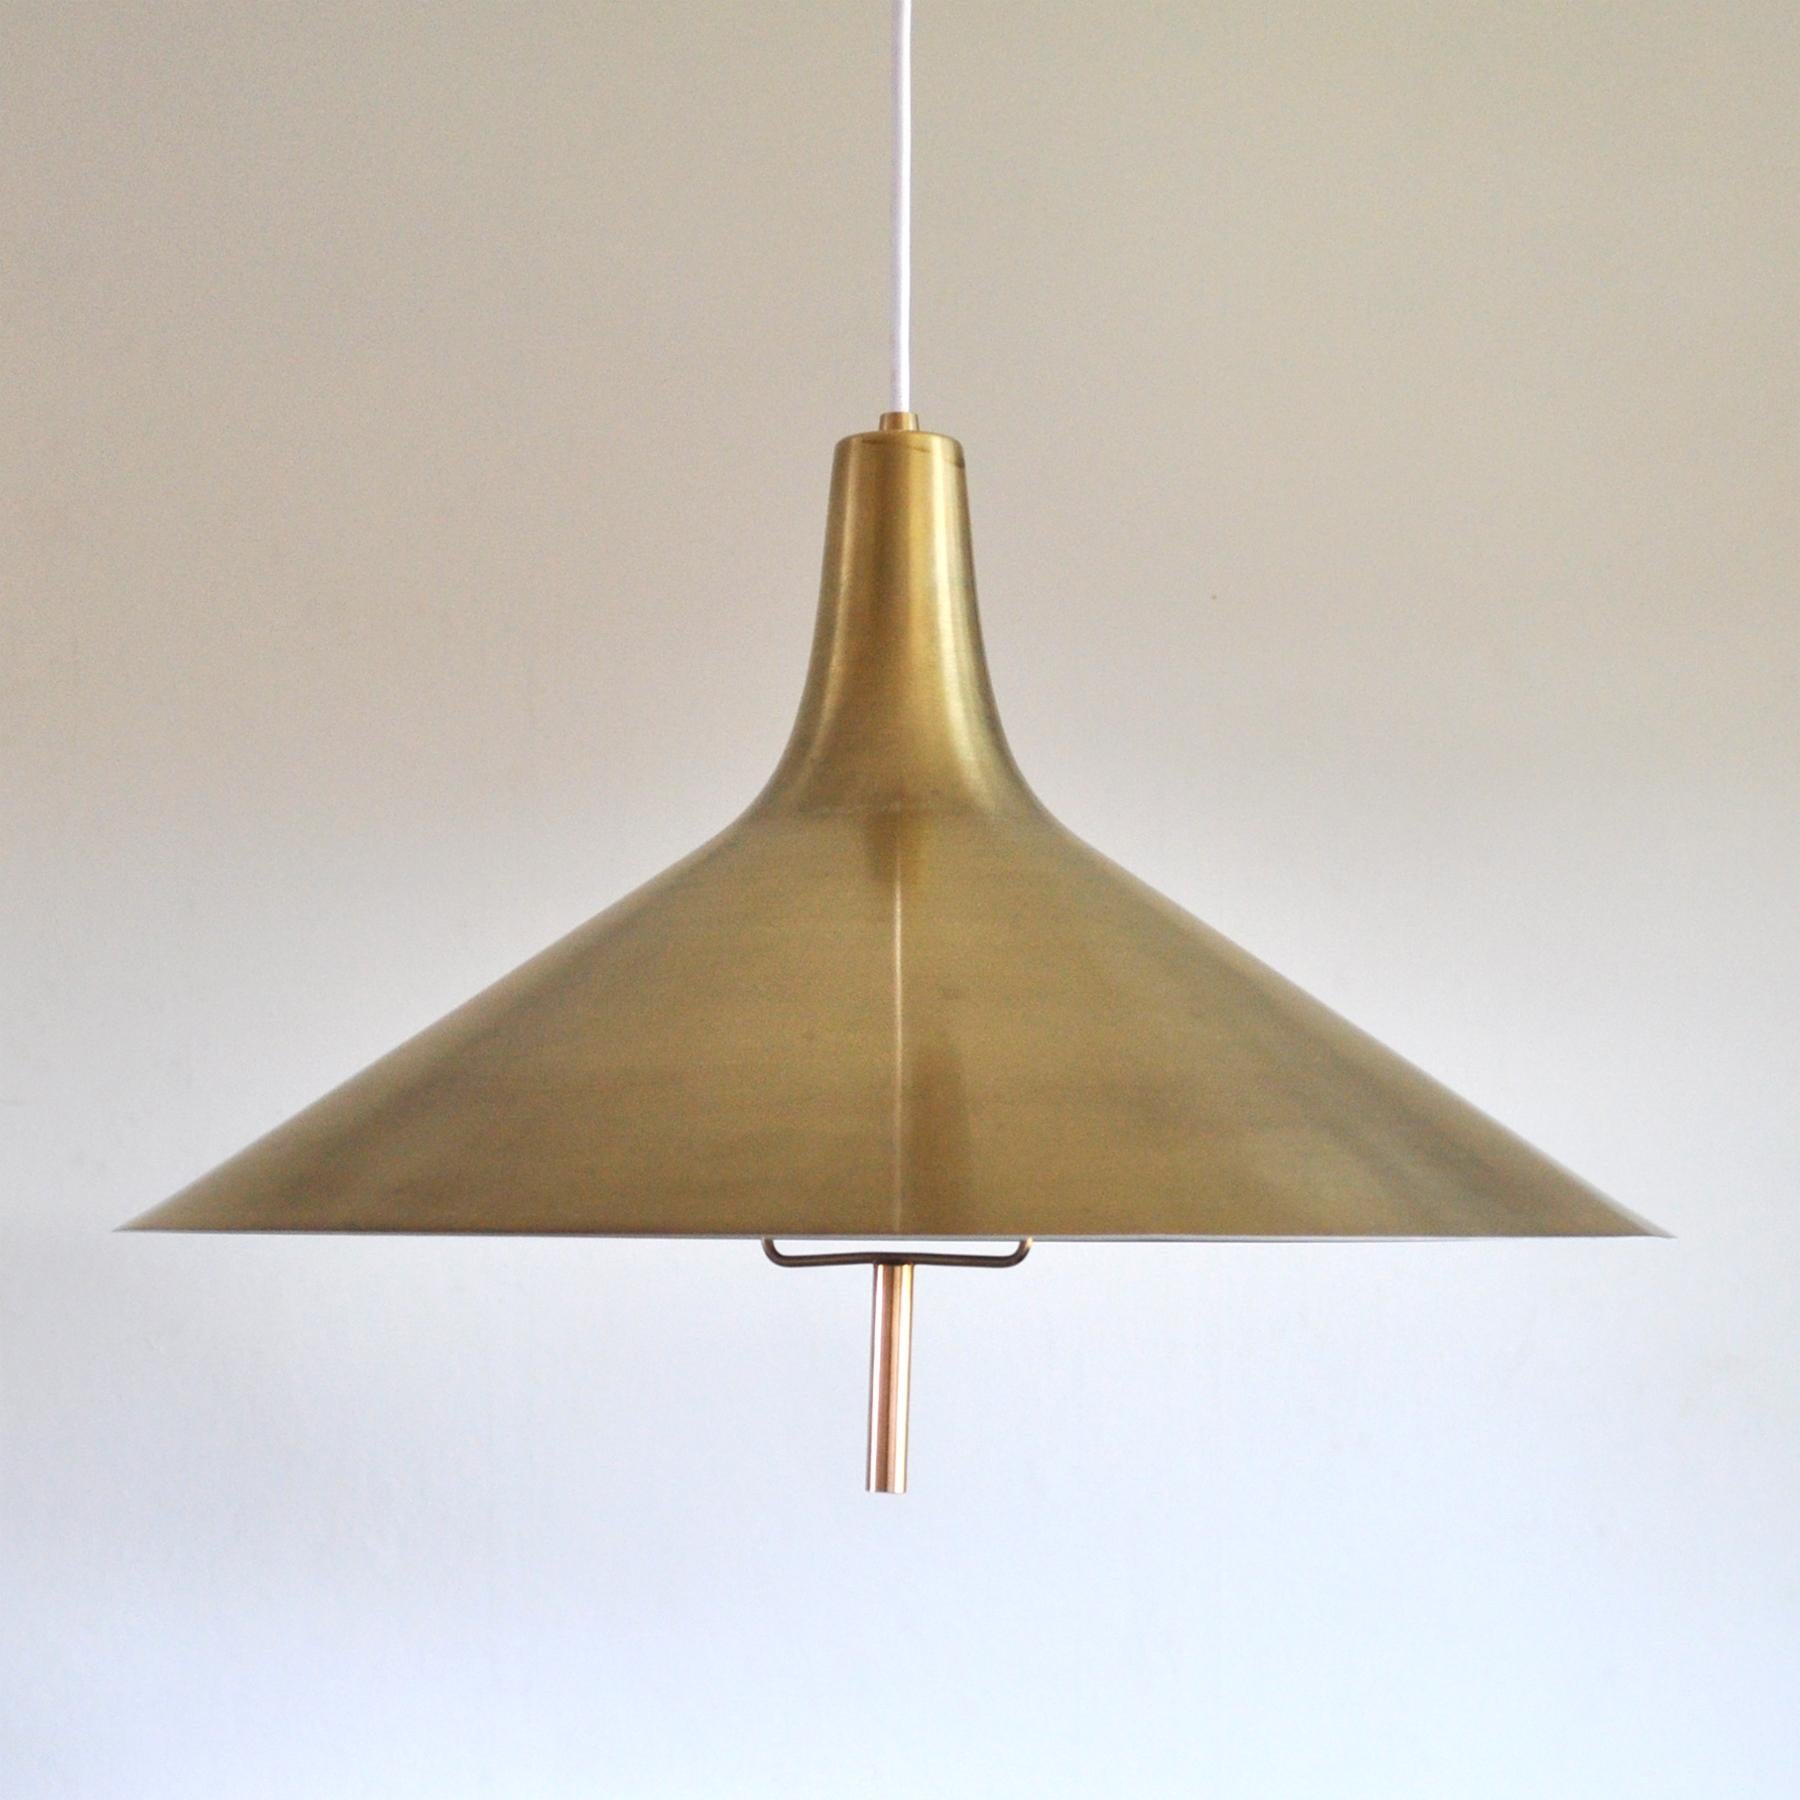 Mid-Century Modern counter weight brass chandelier with adjustable height designed by Danish Th. Valentiner in the style of Paavo Tynell.

Innerside of shade with new white lacquer, rewired.

Fine condition with some signs of wear. For details